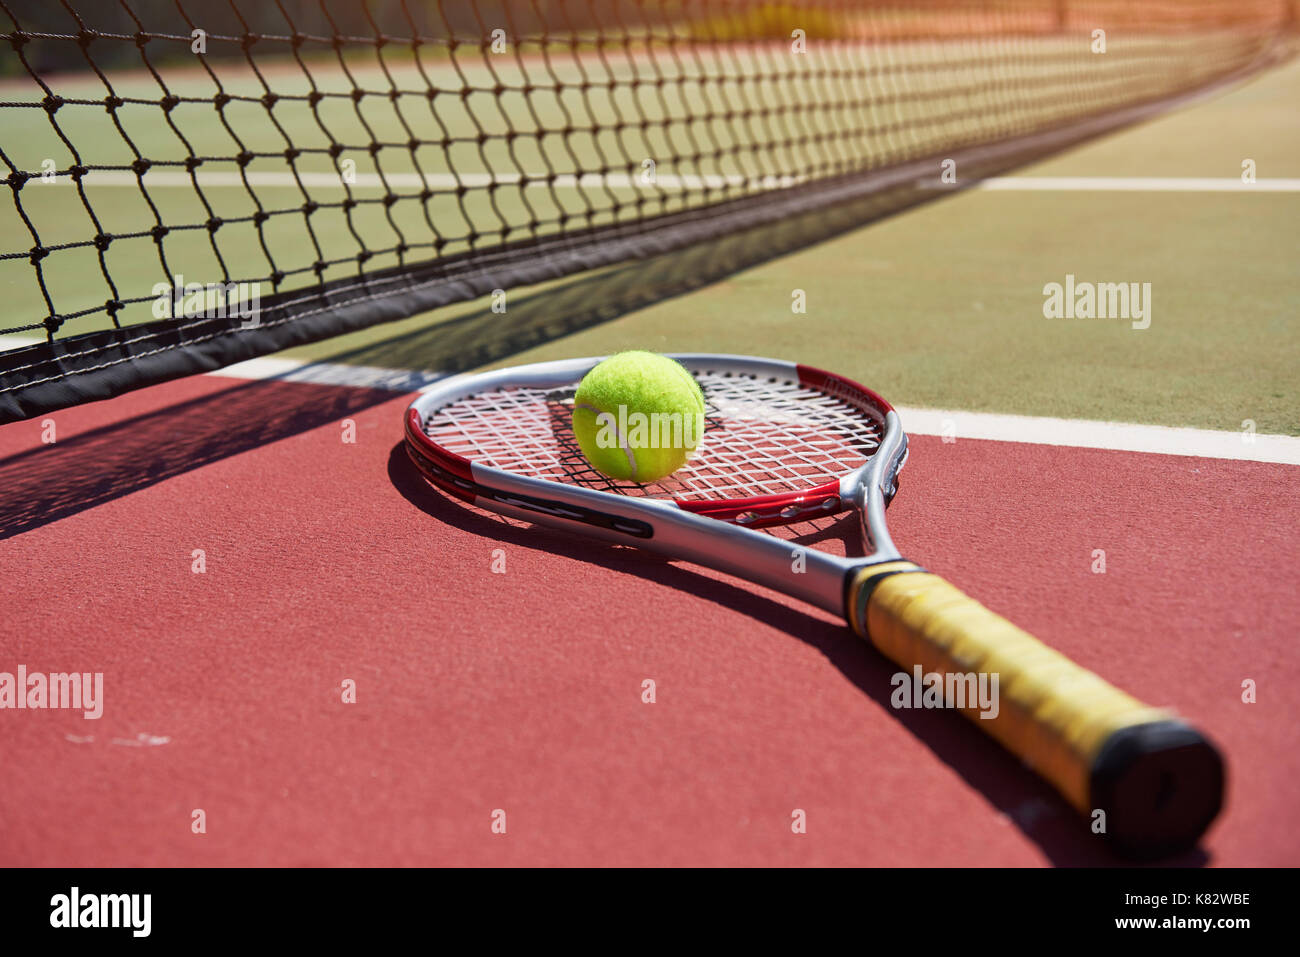 A tennis racket and new tennis ball on a freshly painted tennis court. Stock Photo